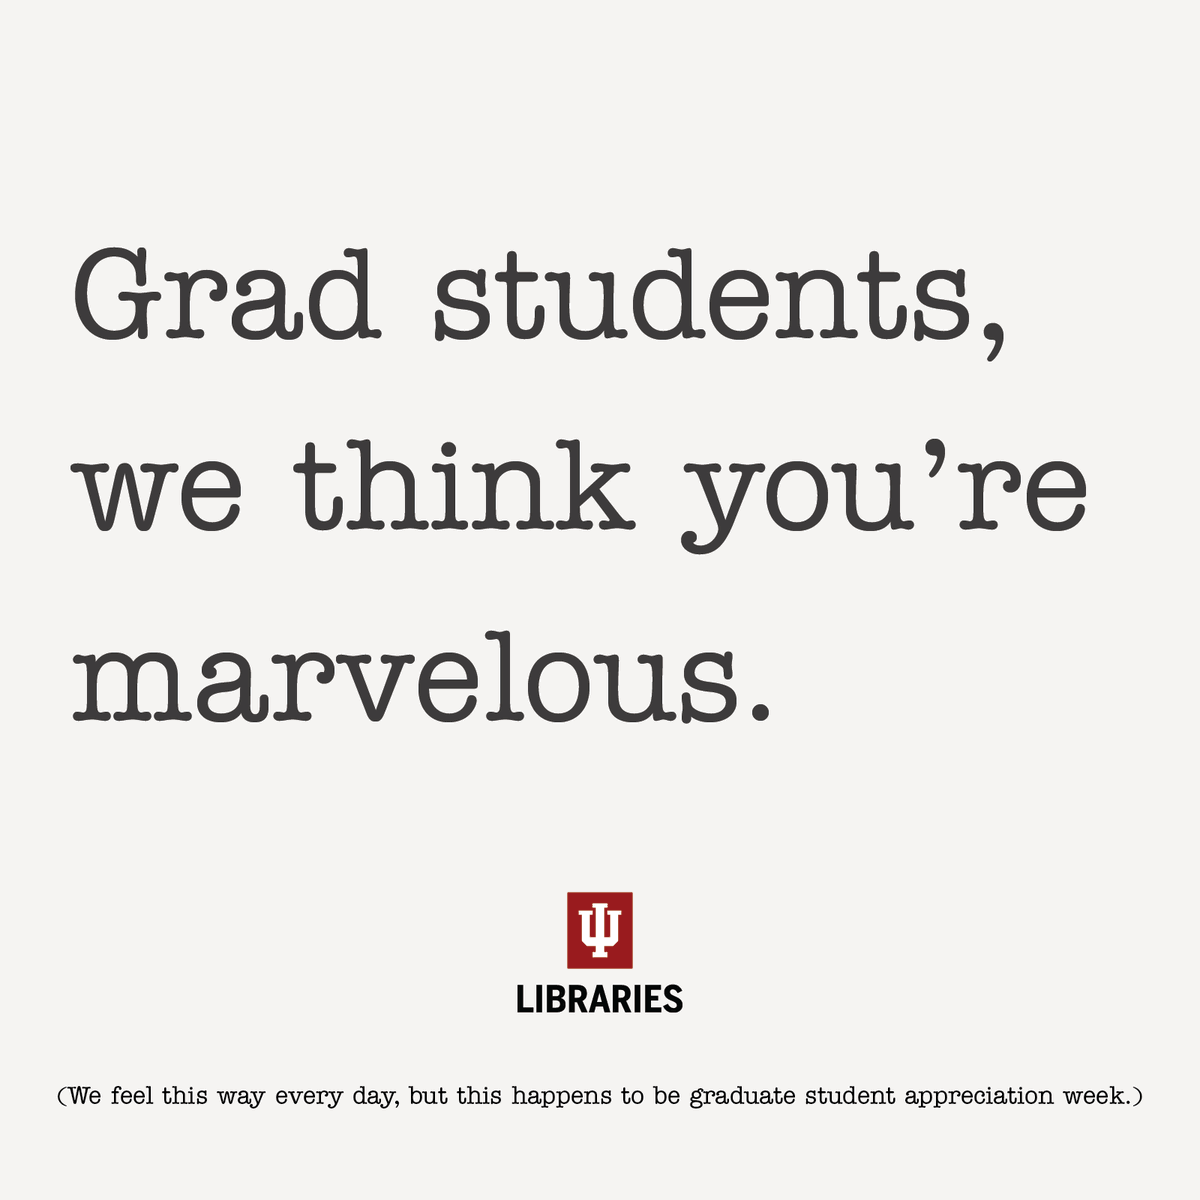 Happy Graduate & Professional Student Appreciation Week! Grad students are some of our most dedicated library users, and we couldn't get by without our grad student library employees. We appreciate you all!